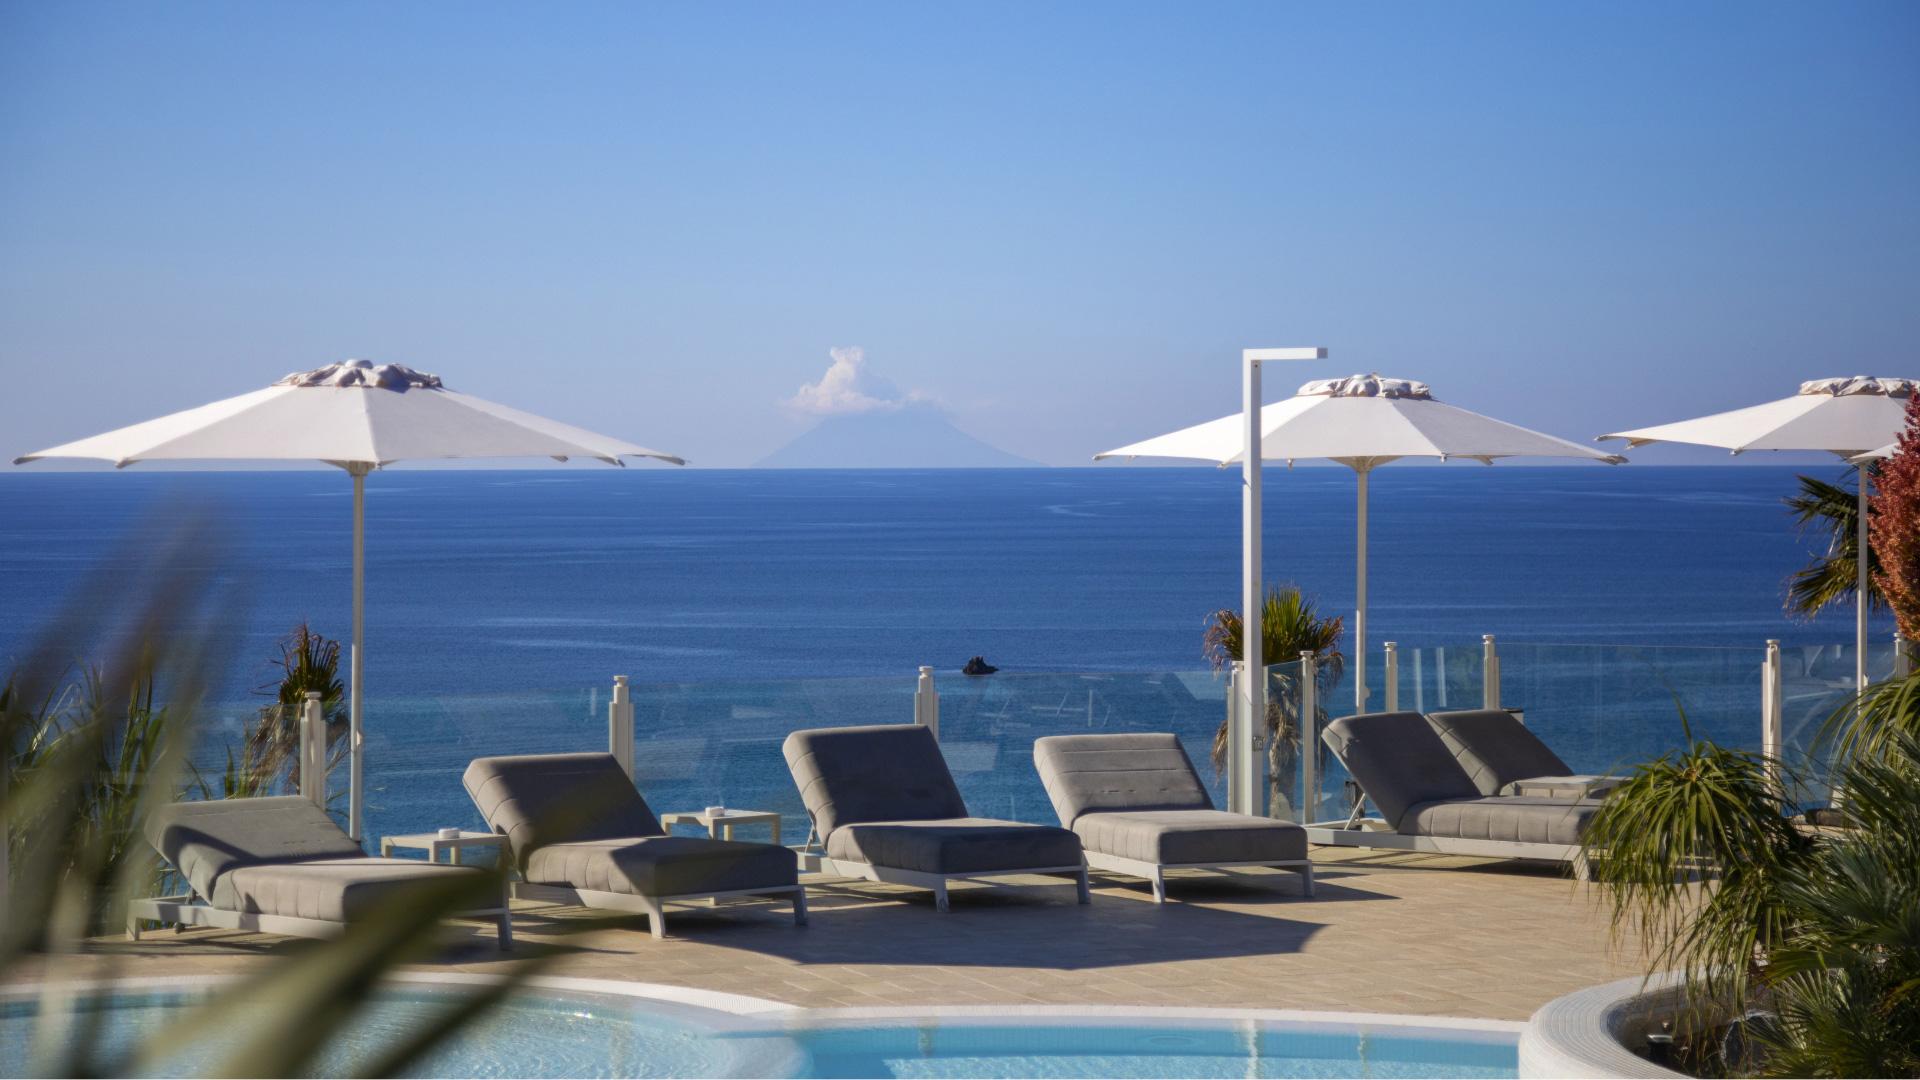 Pool with loungers and umbrellas, sea view and distant volcano.